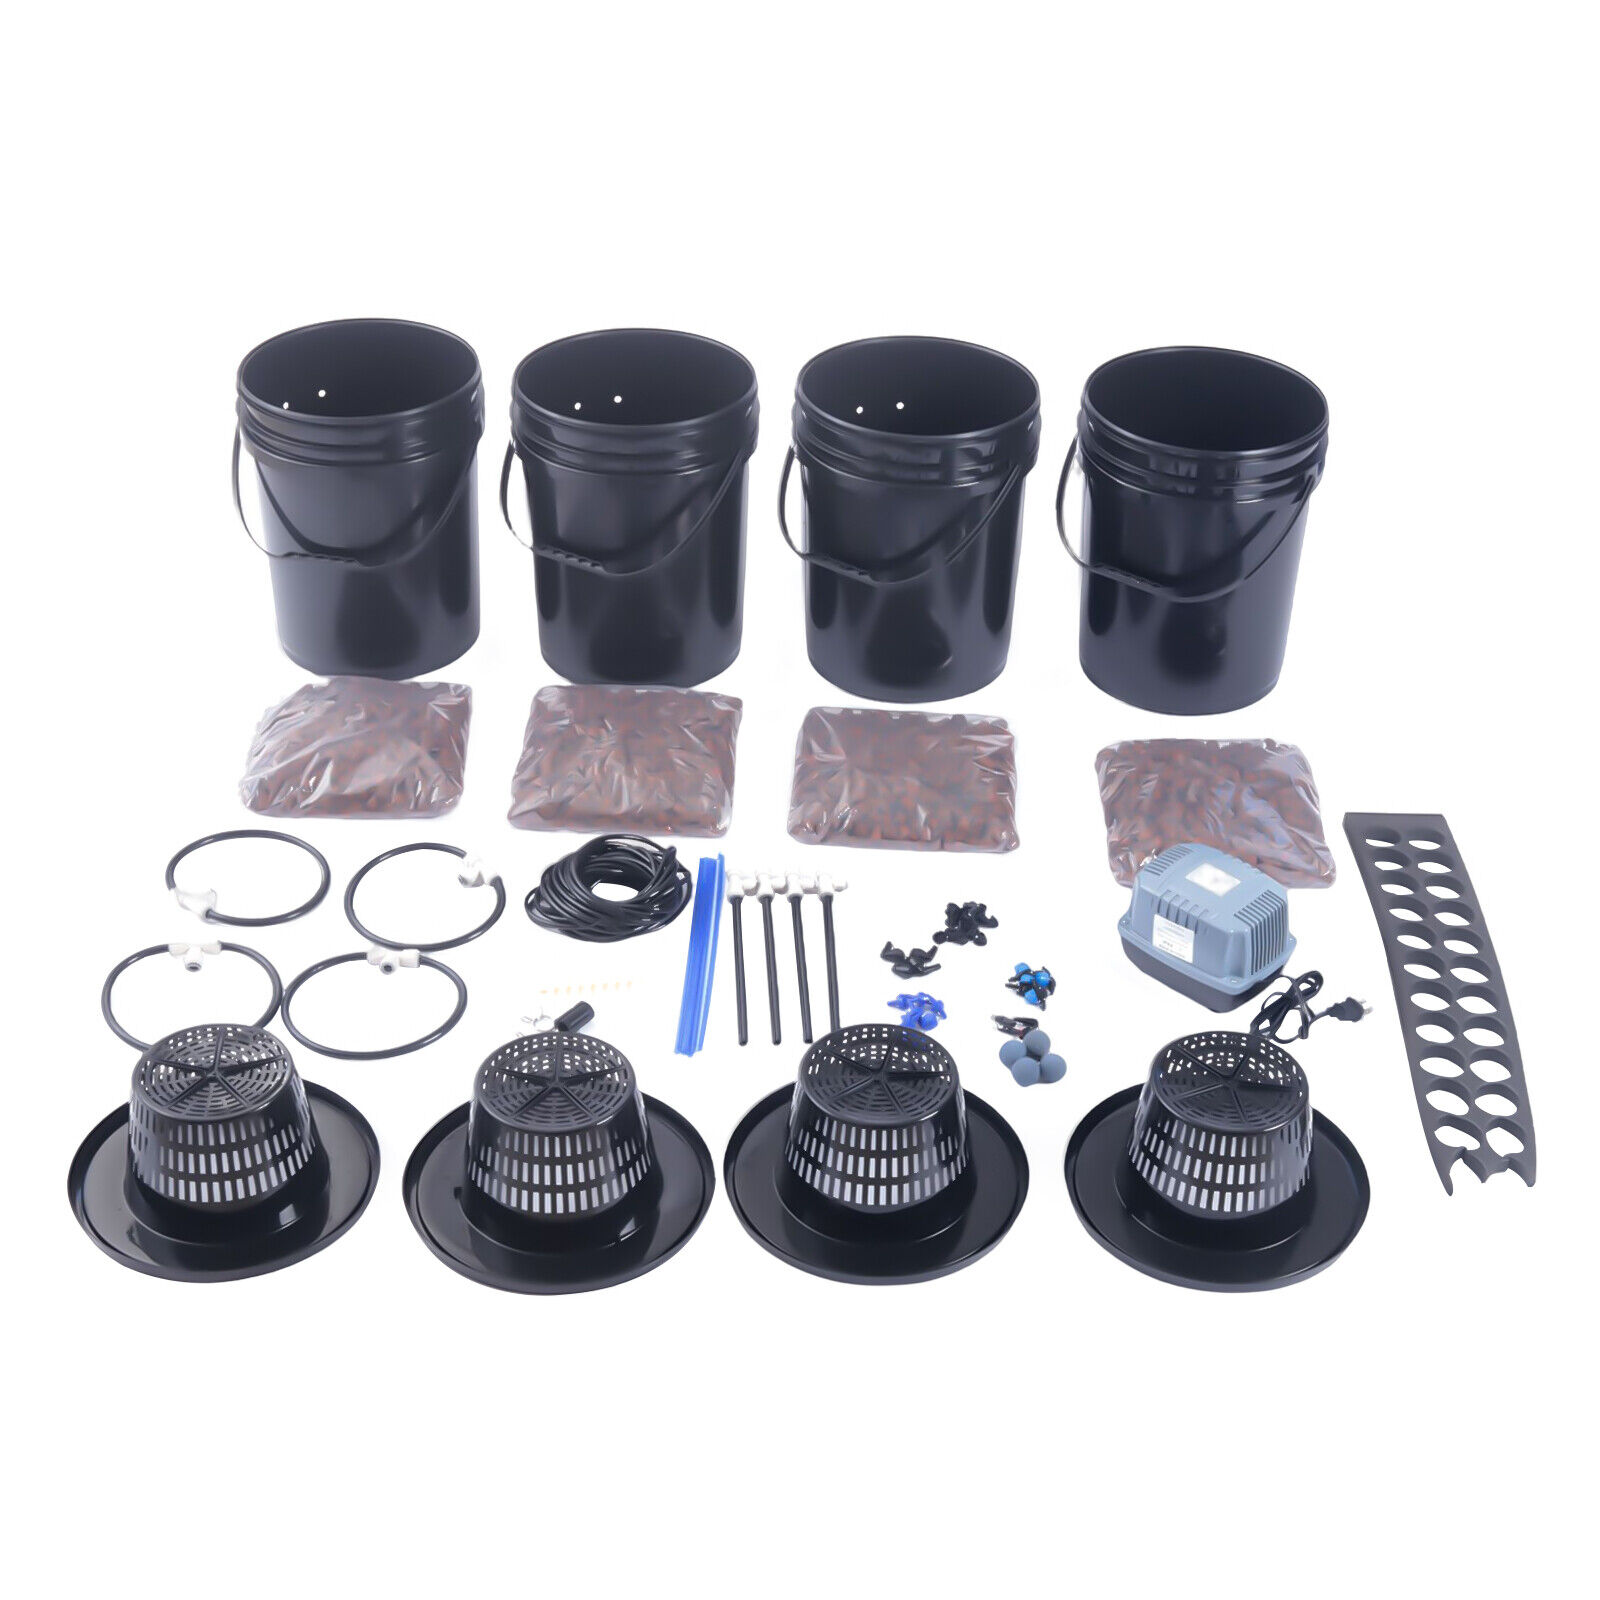 Complete Hydroponics Growing System Drip Garden System w/ 20L Hydroponic Buckets